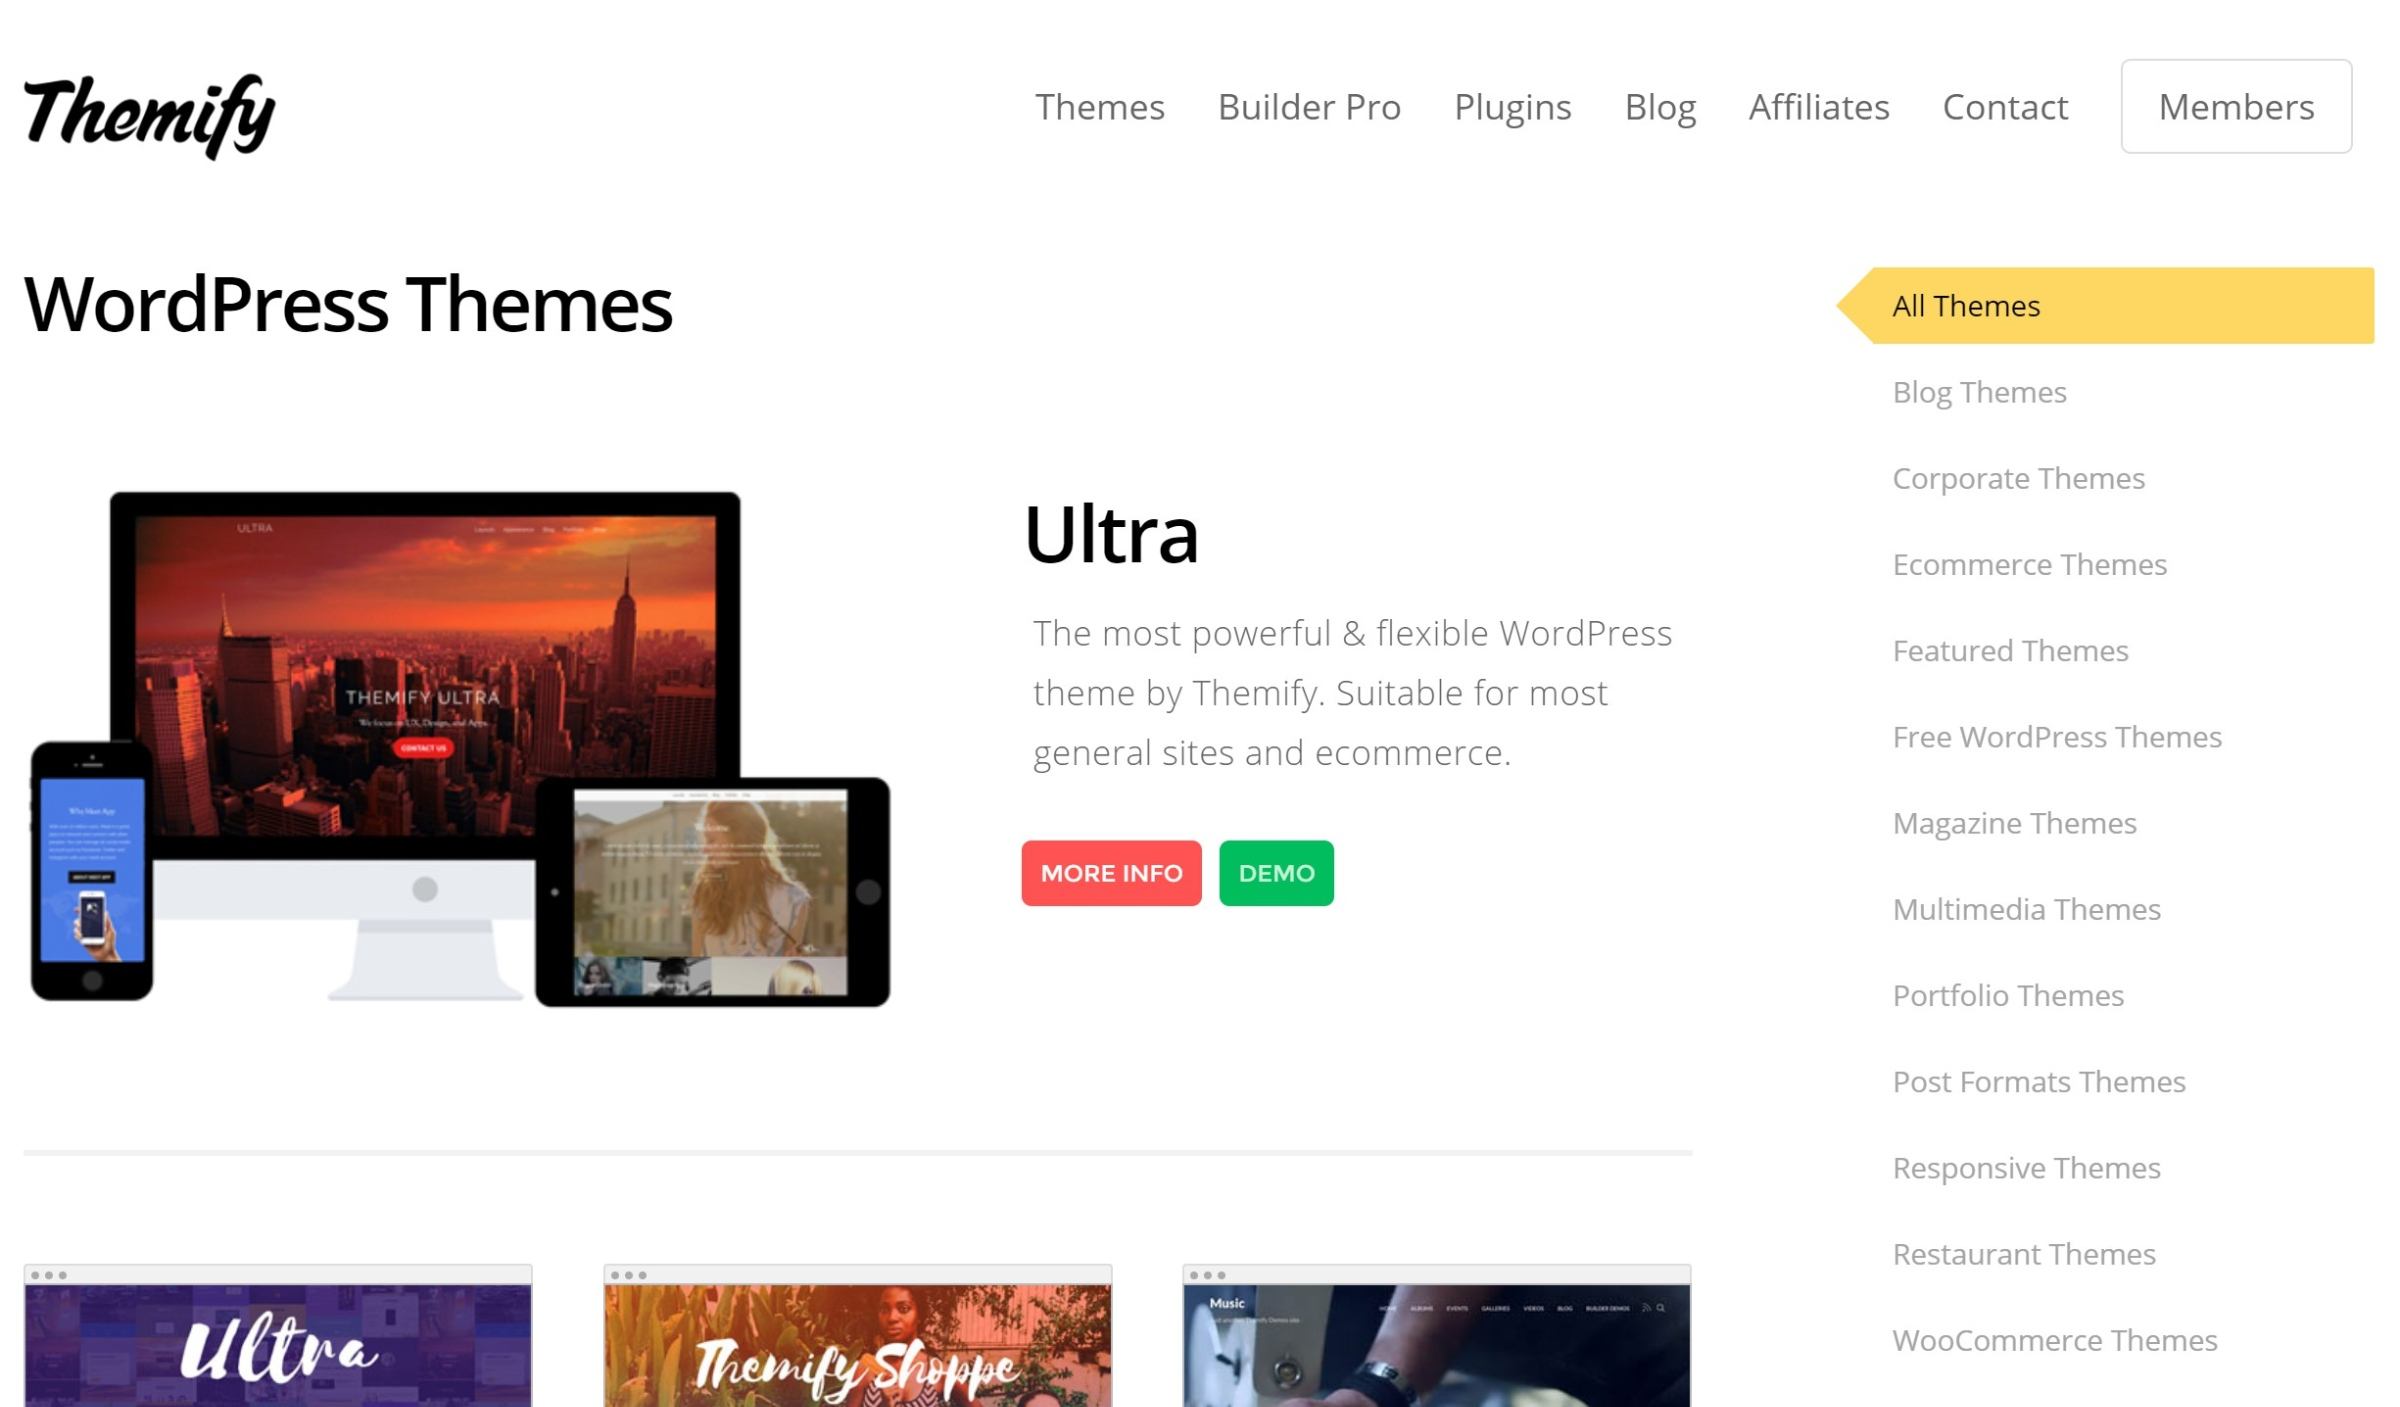 Themify theme listing page